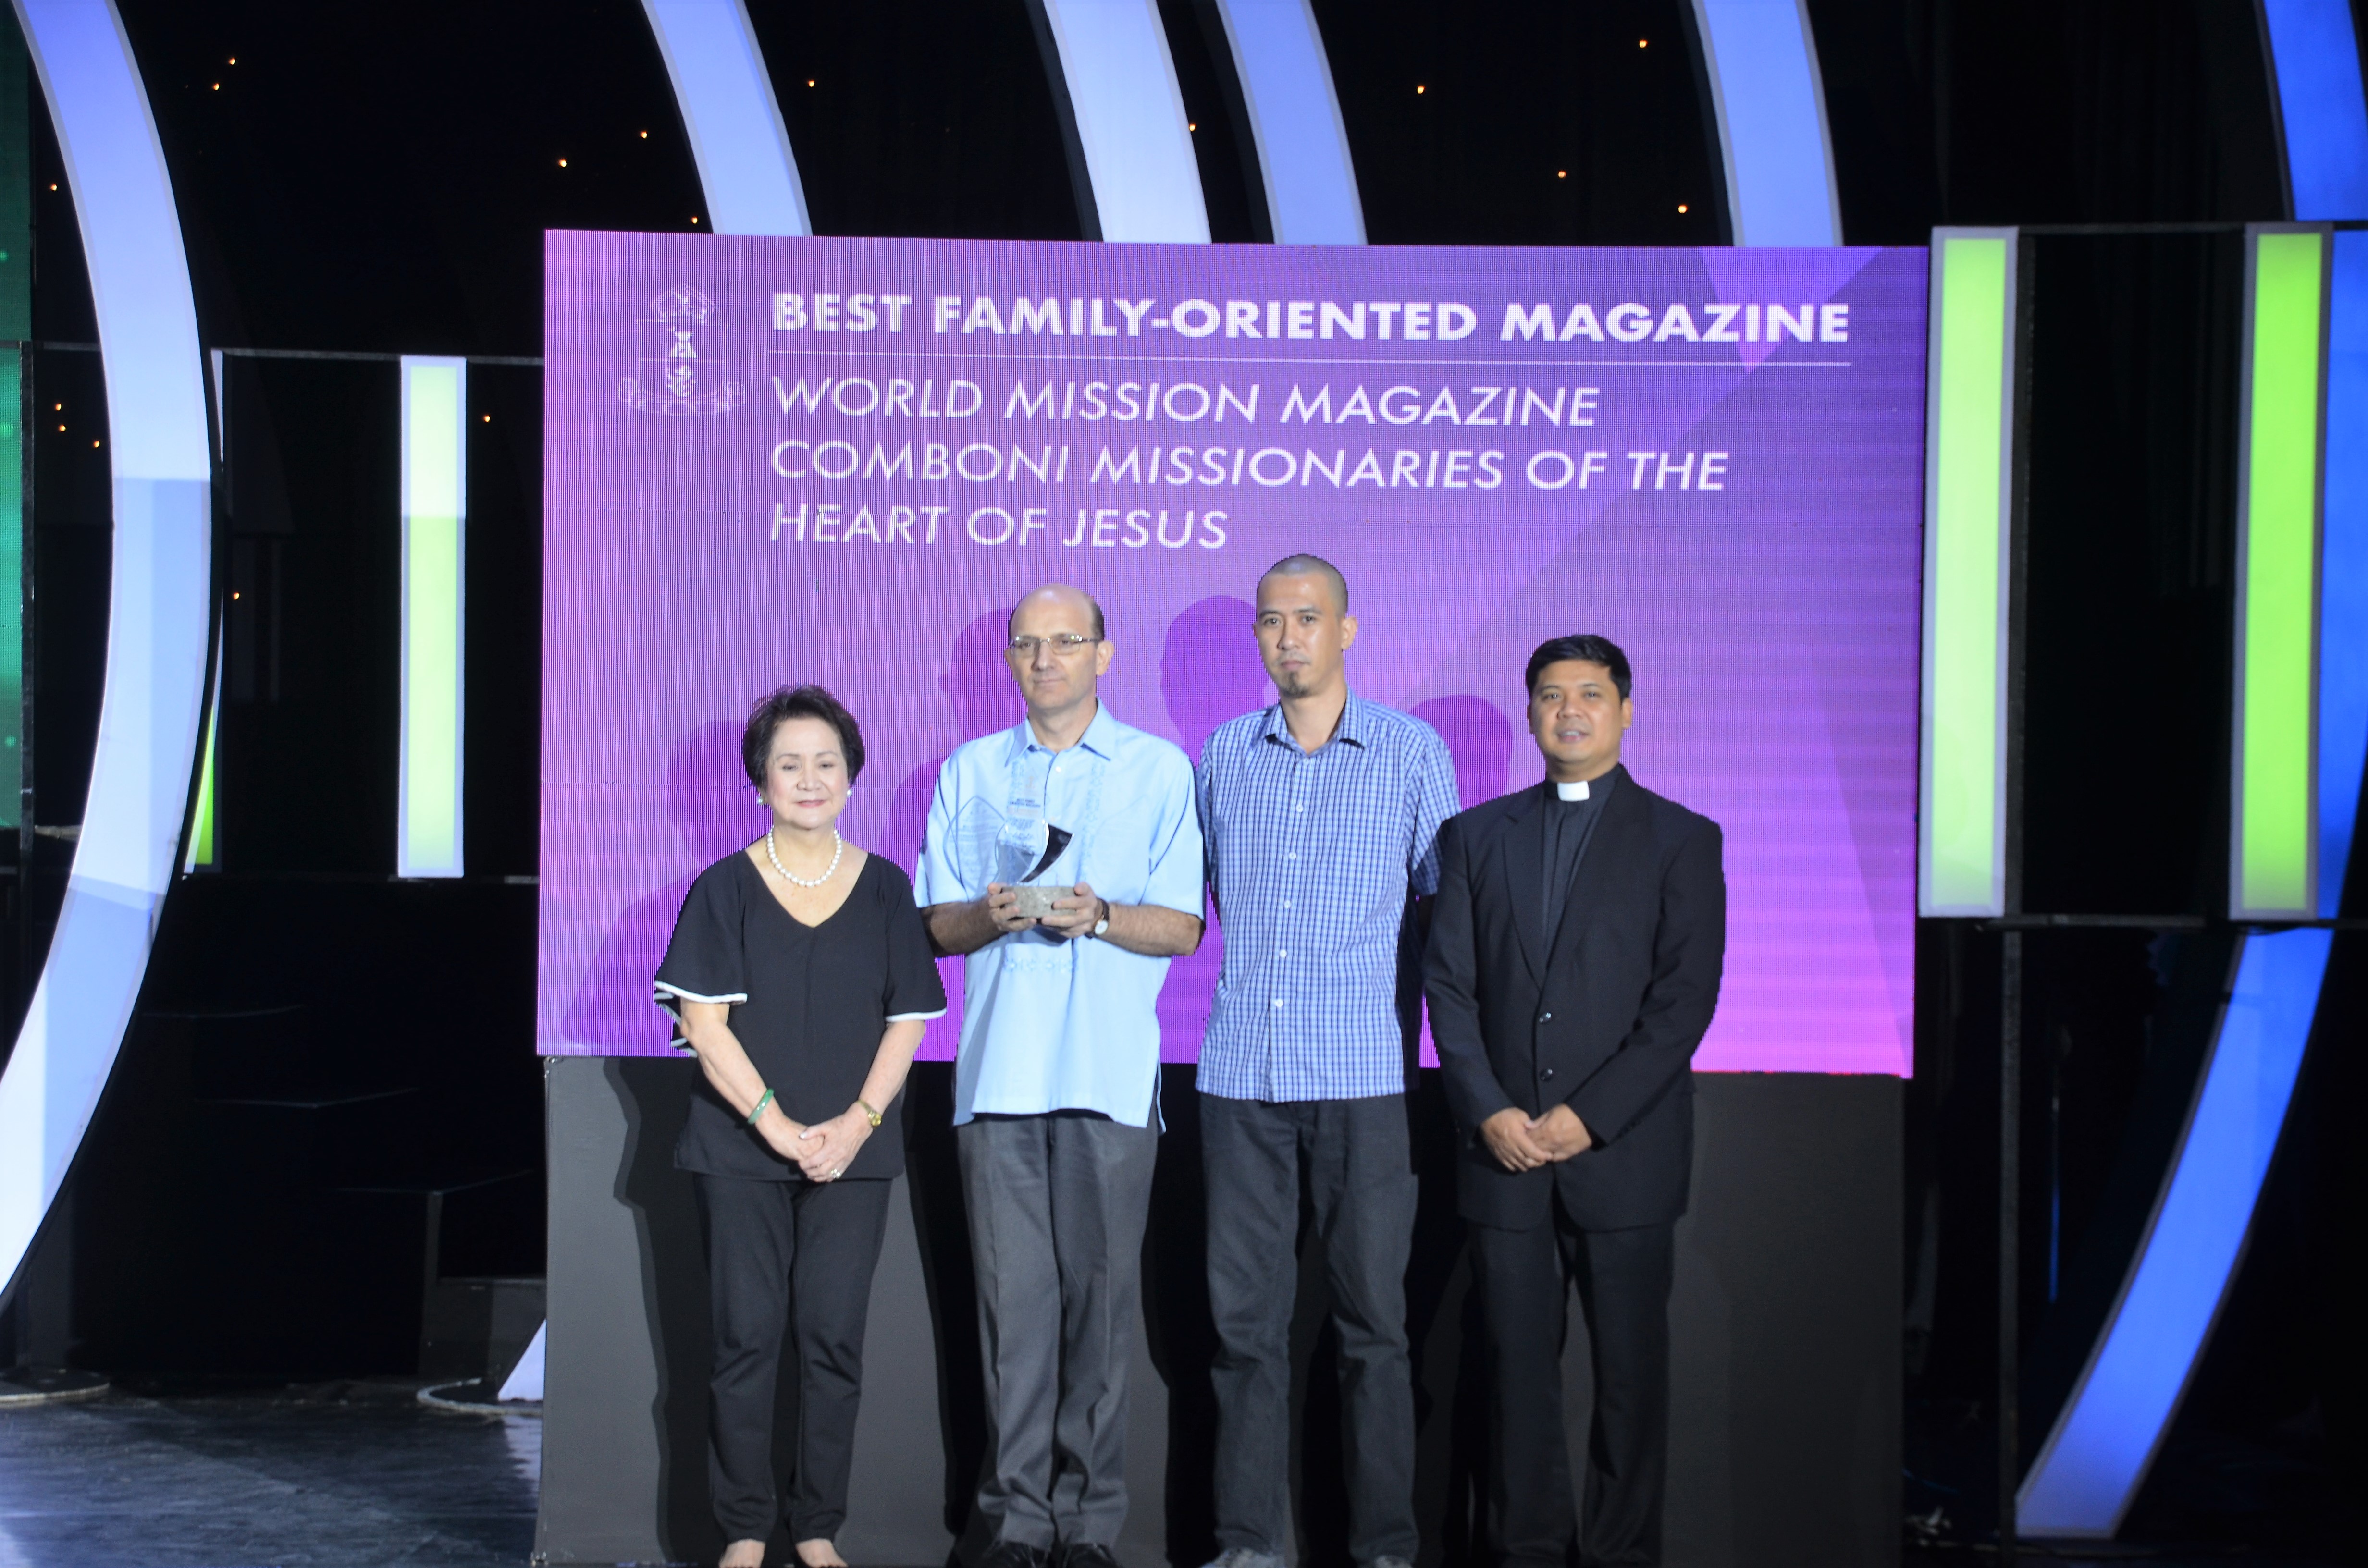 World Mission receives award for Best Family-oriented magazine